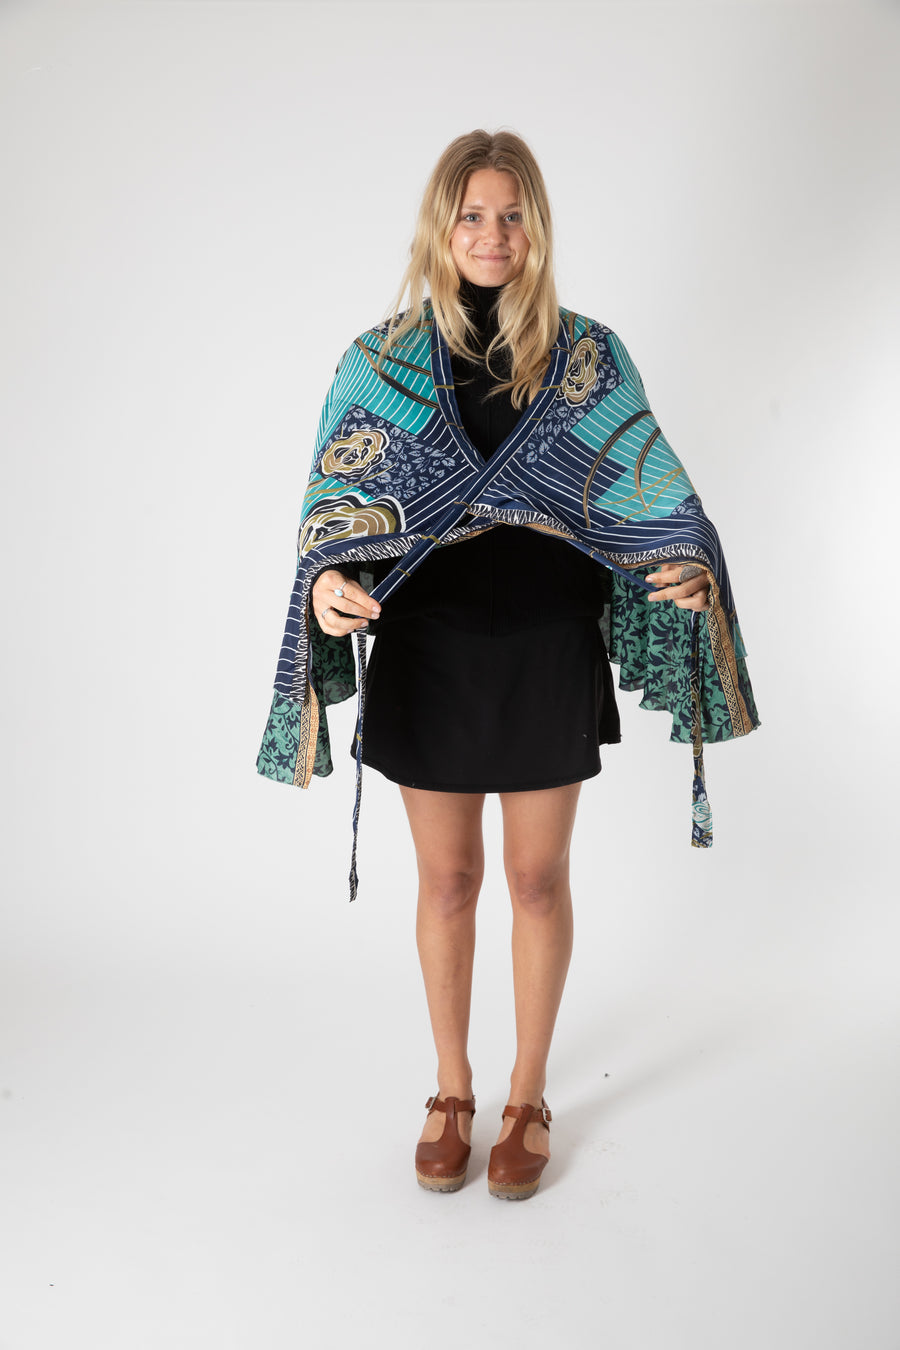 Beautiful blonde hippie girl wearing a teal recycled silk magic skirt as a boho hippie style shrug